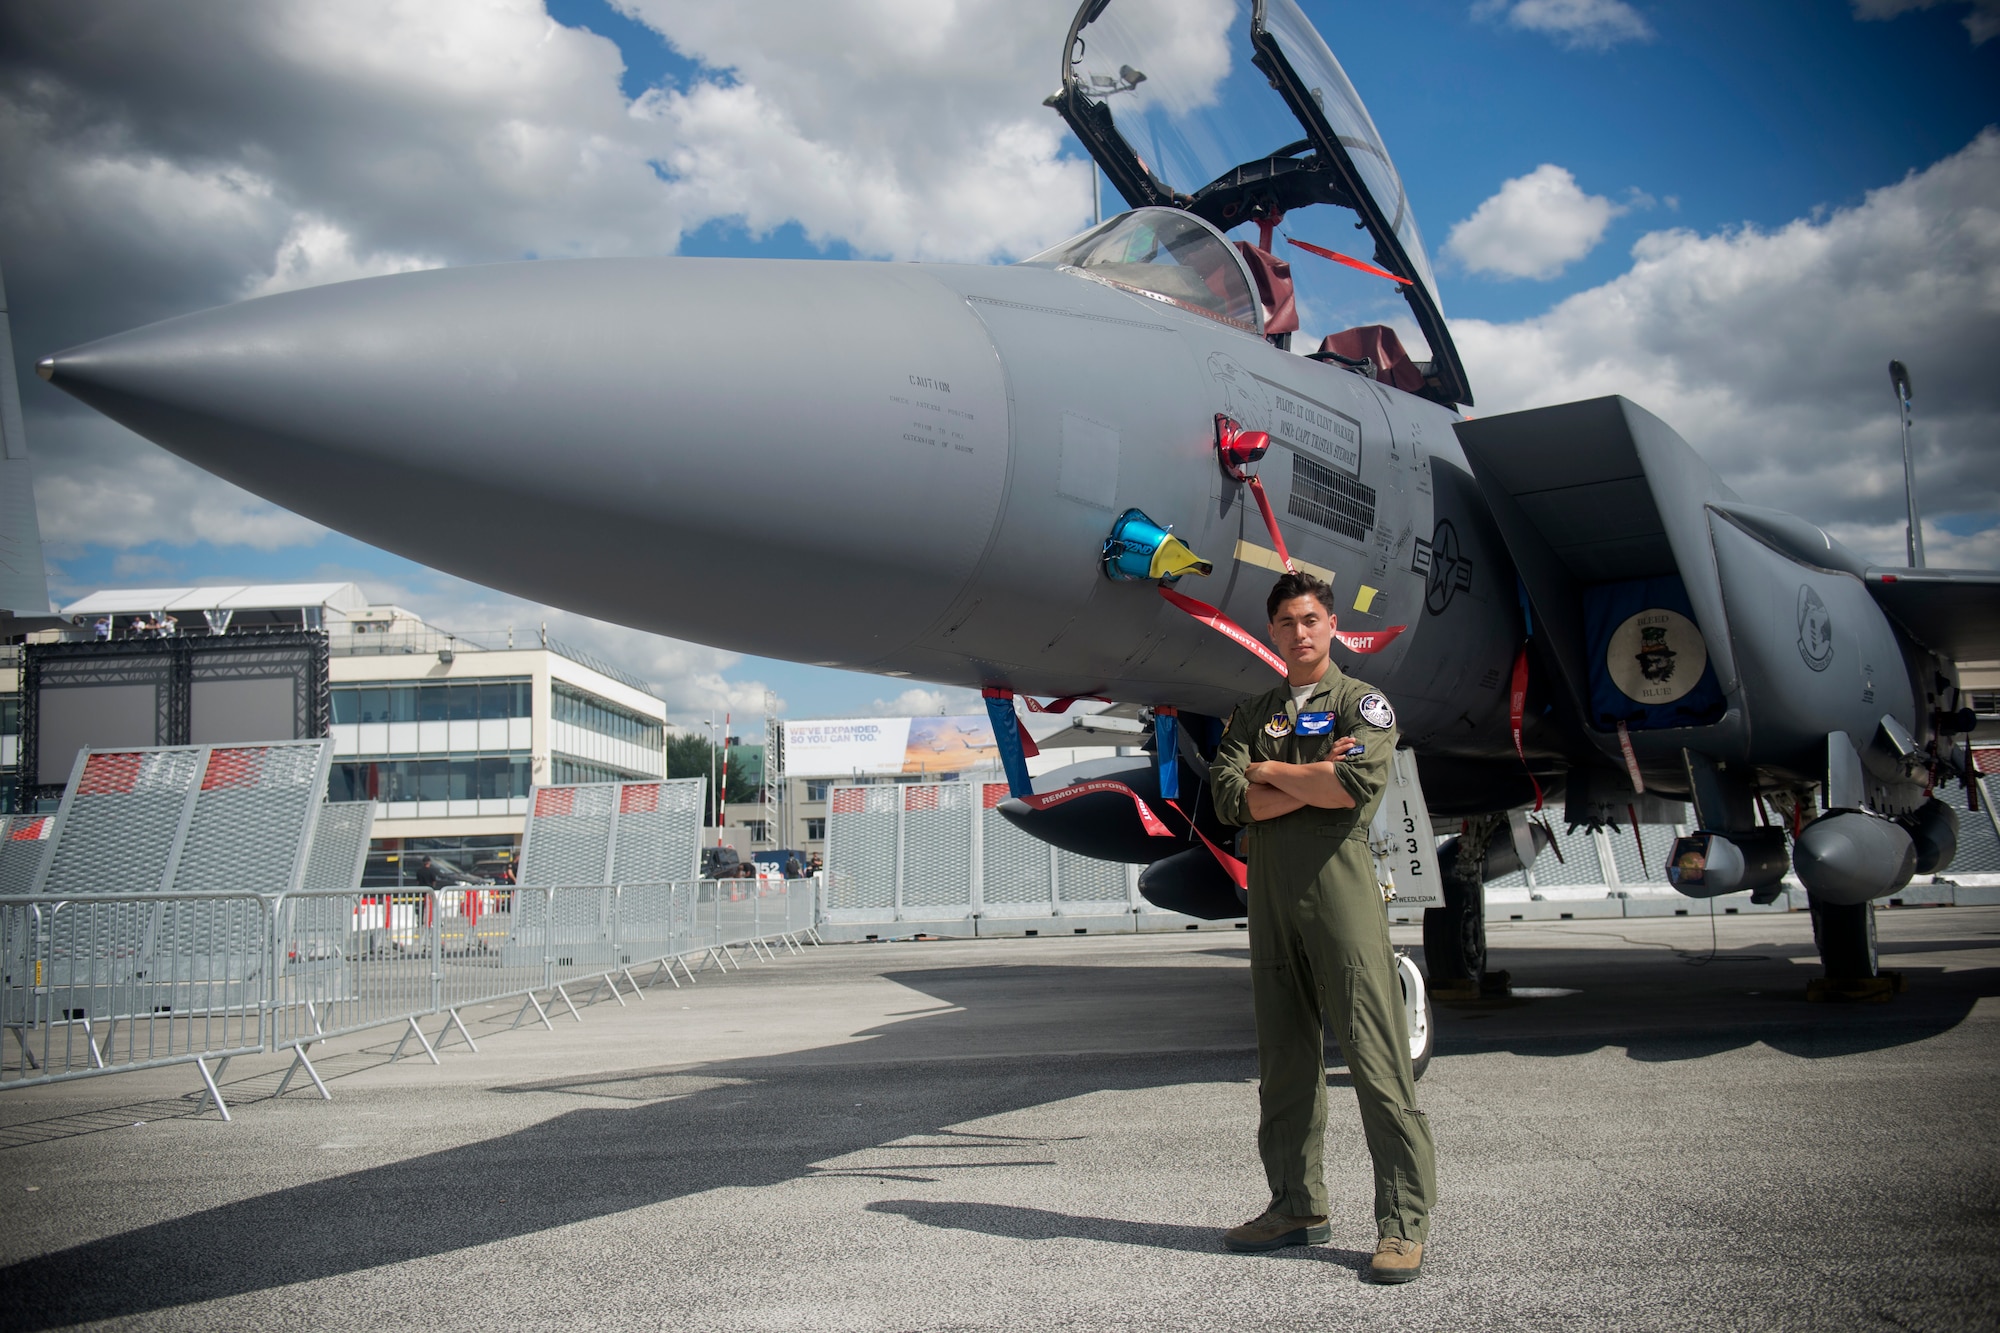 U.S. Air Force 1st Lt. Brandon "Animal" Shelley, a 492nd Fighter Squadron weapon systems officer from the 48th Fighter Wing at Royal Air Force Lakenheath, England, poses for a photo in front of an F-15E Strike Eagle from his squadron at the Paris Air Show, June 21, 2019. Other Department of Defense aircraft showcased during the air show included the K-46A Pegasus, F-35A Lightning II, C-130J Super Hercules, P-8 Poseidon, CH-47 Chinook, and AH-64 Apache. (U.S. Air Force photo by Master Sgt. Eric Burks)